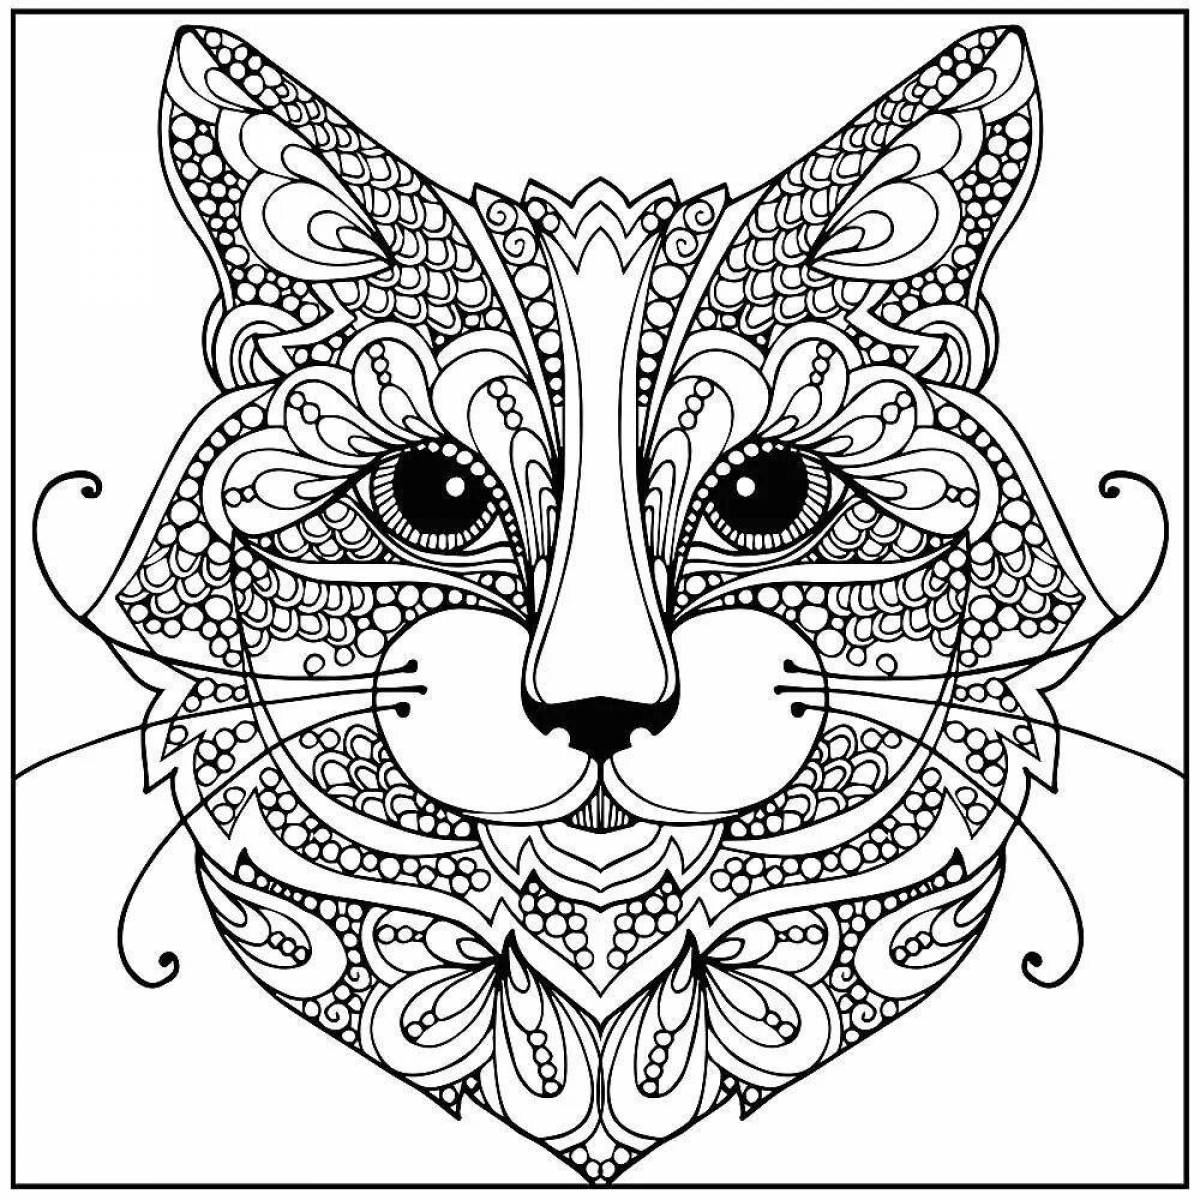 Cunning fox coloring page